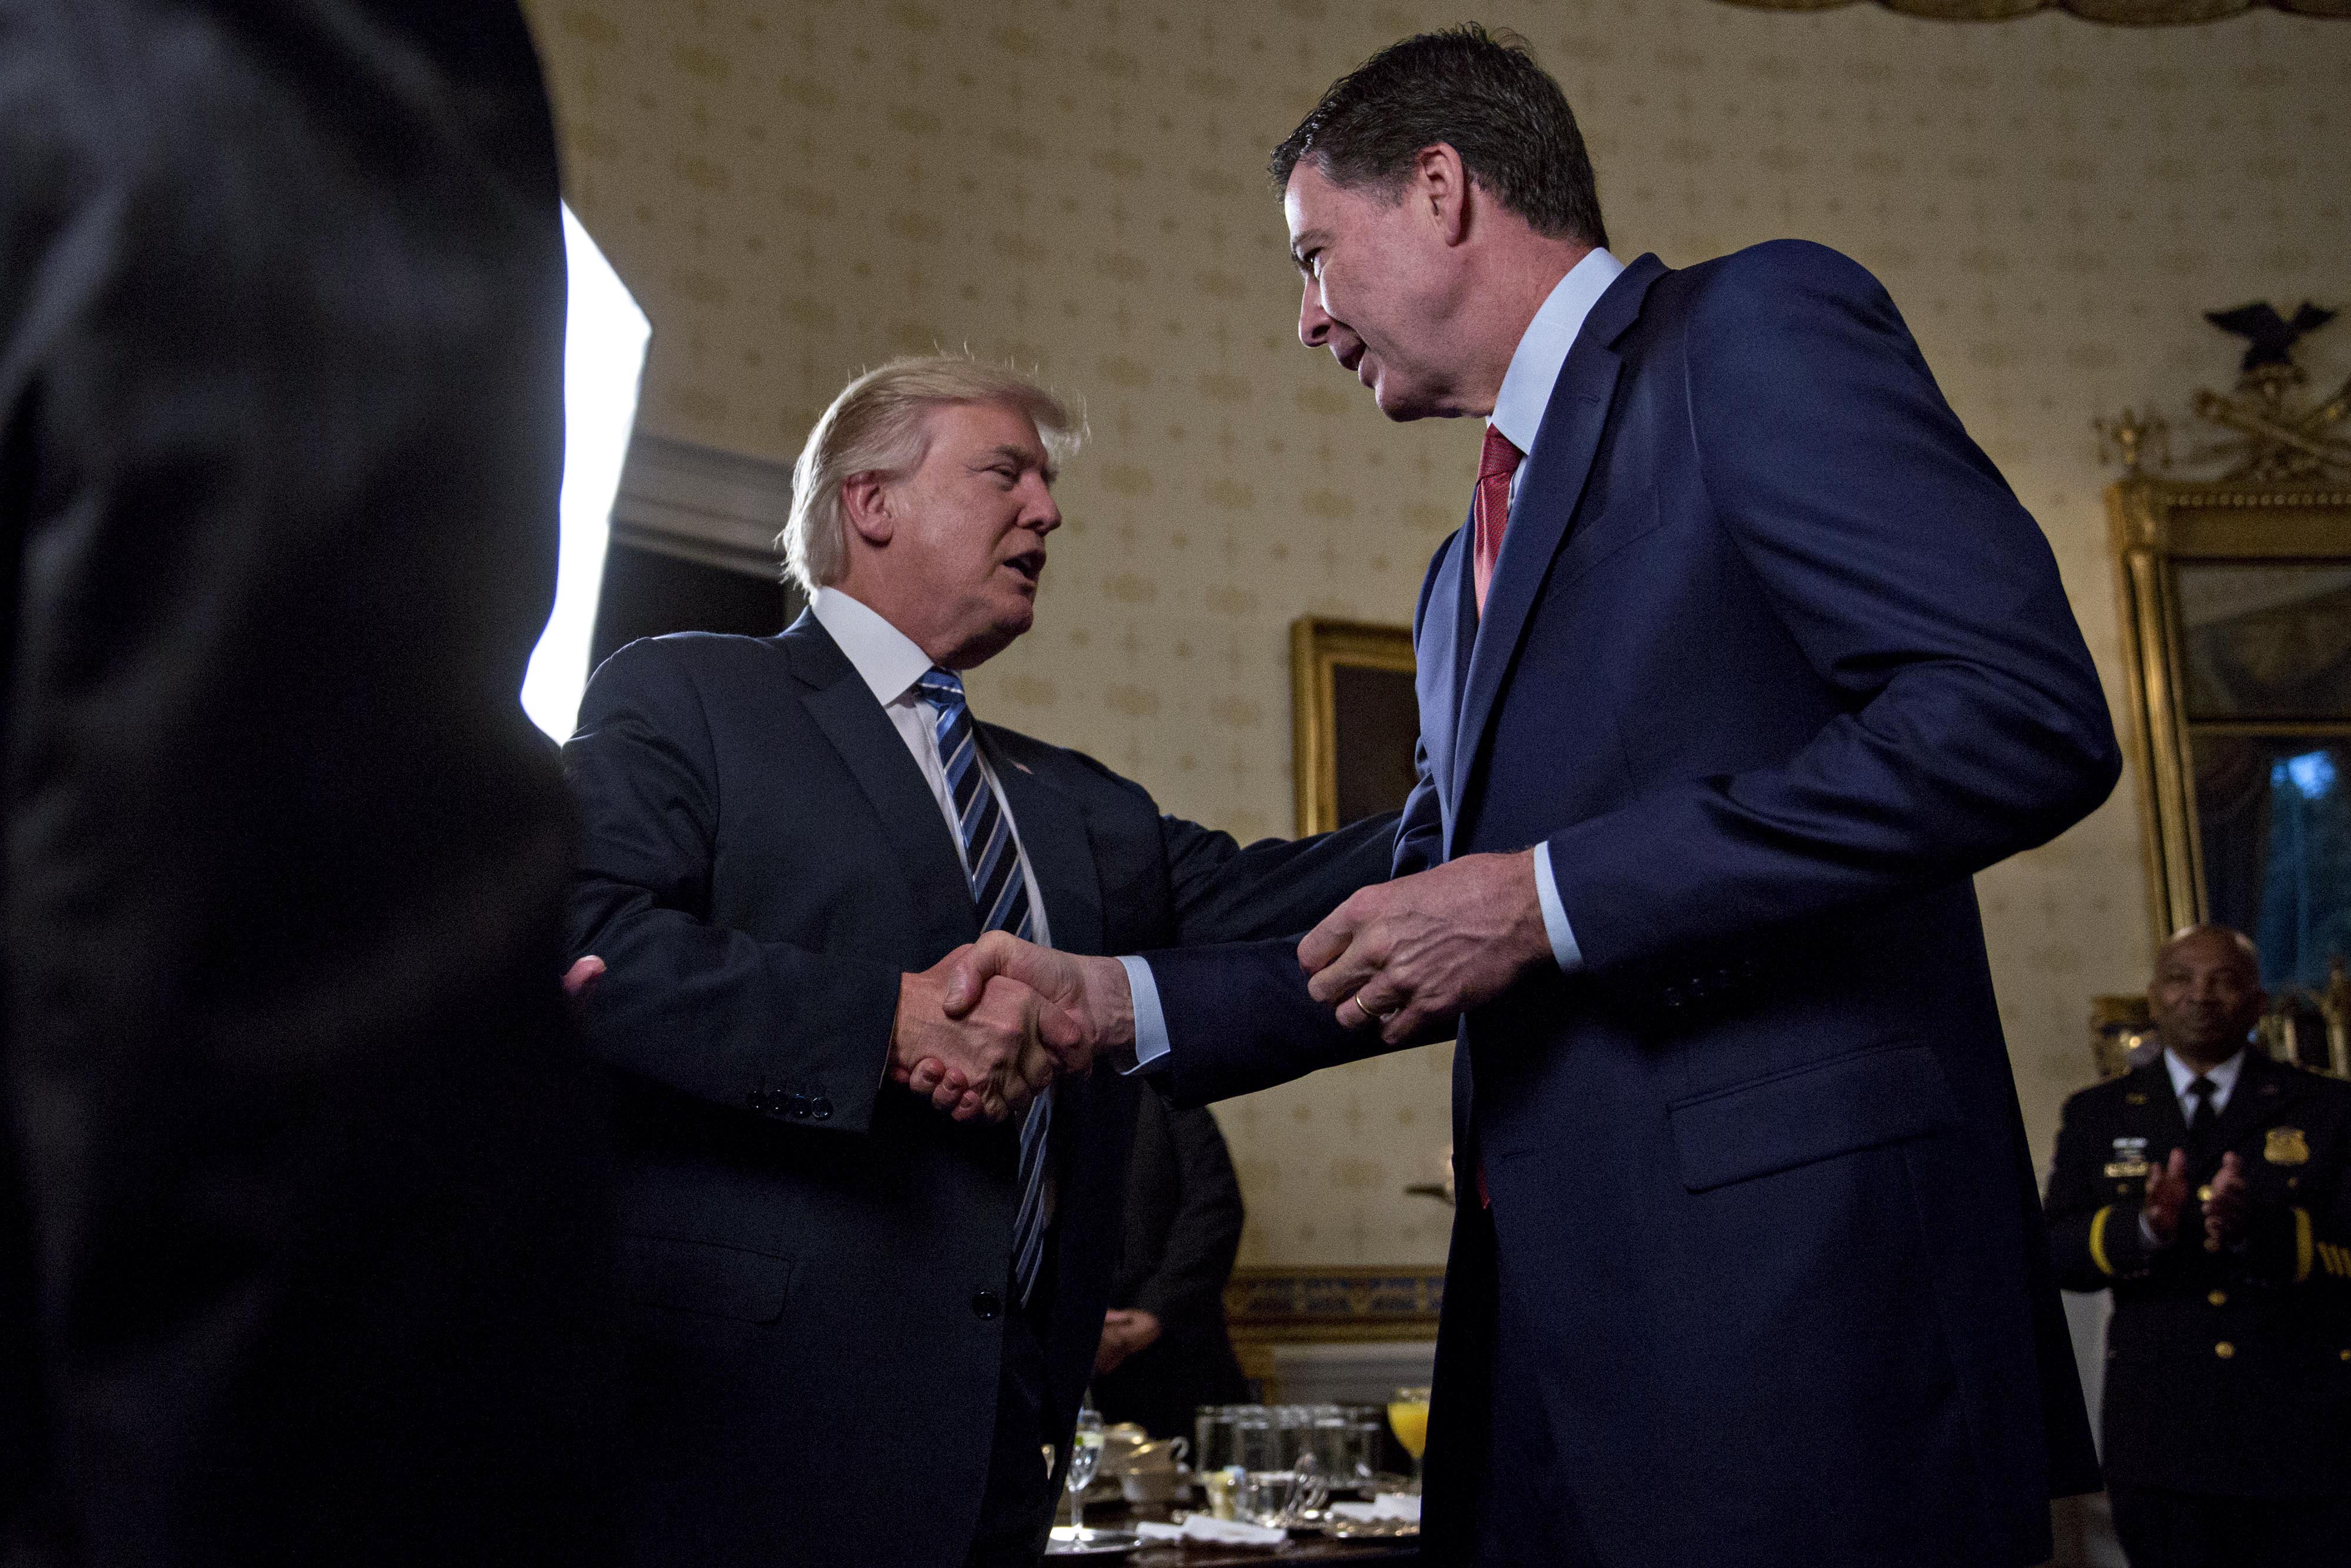 President Donald Trump shakes hands with James Comey, director of the Federal Bureau of Investigation in the Blue Room of the White House on January 22, 2017, in Washington, D.C. (Pool—Getty Images)